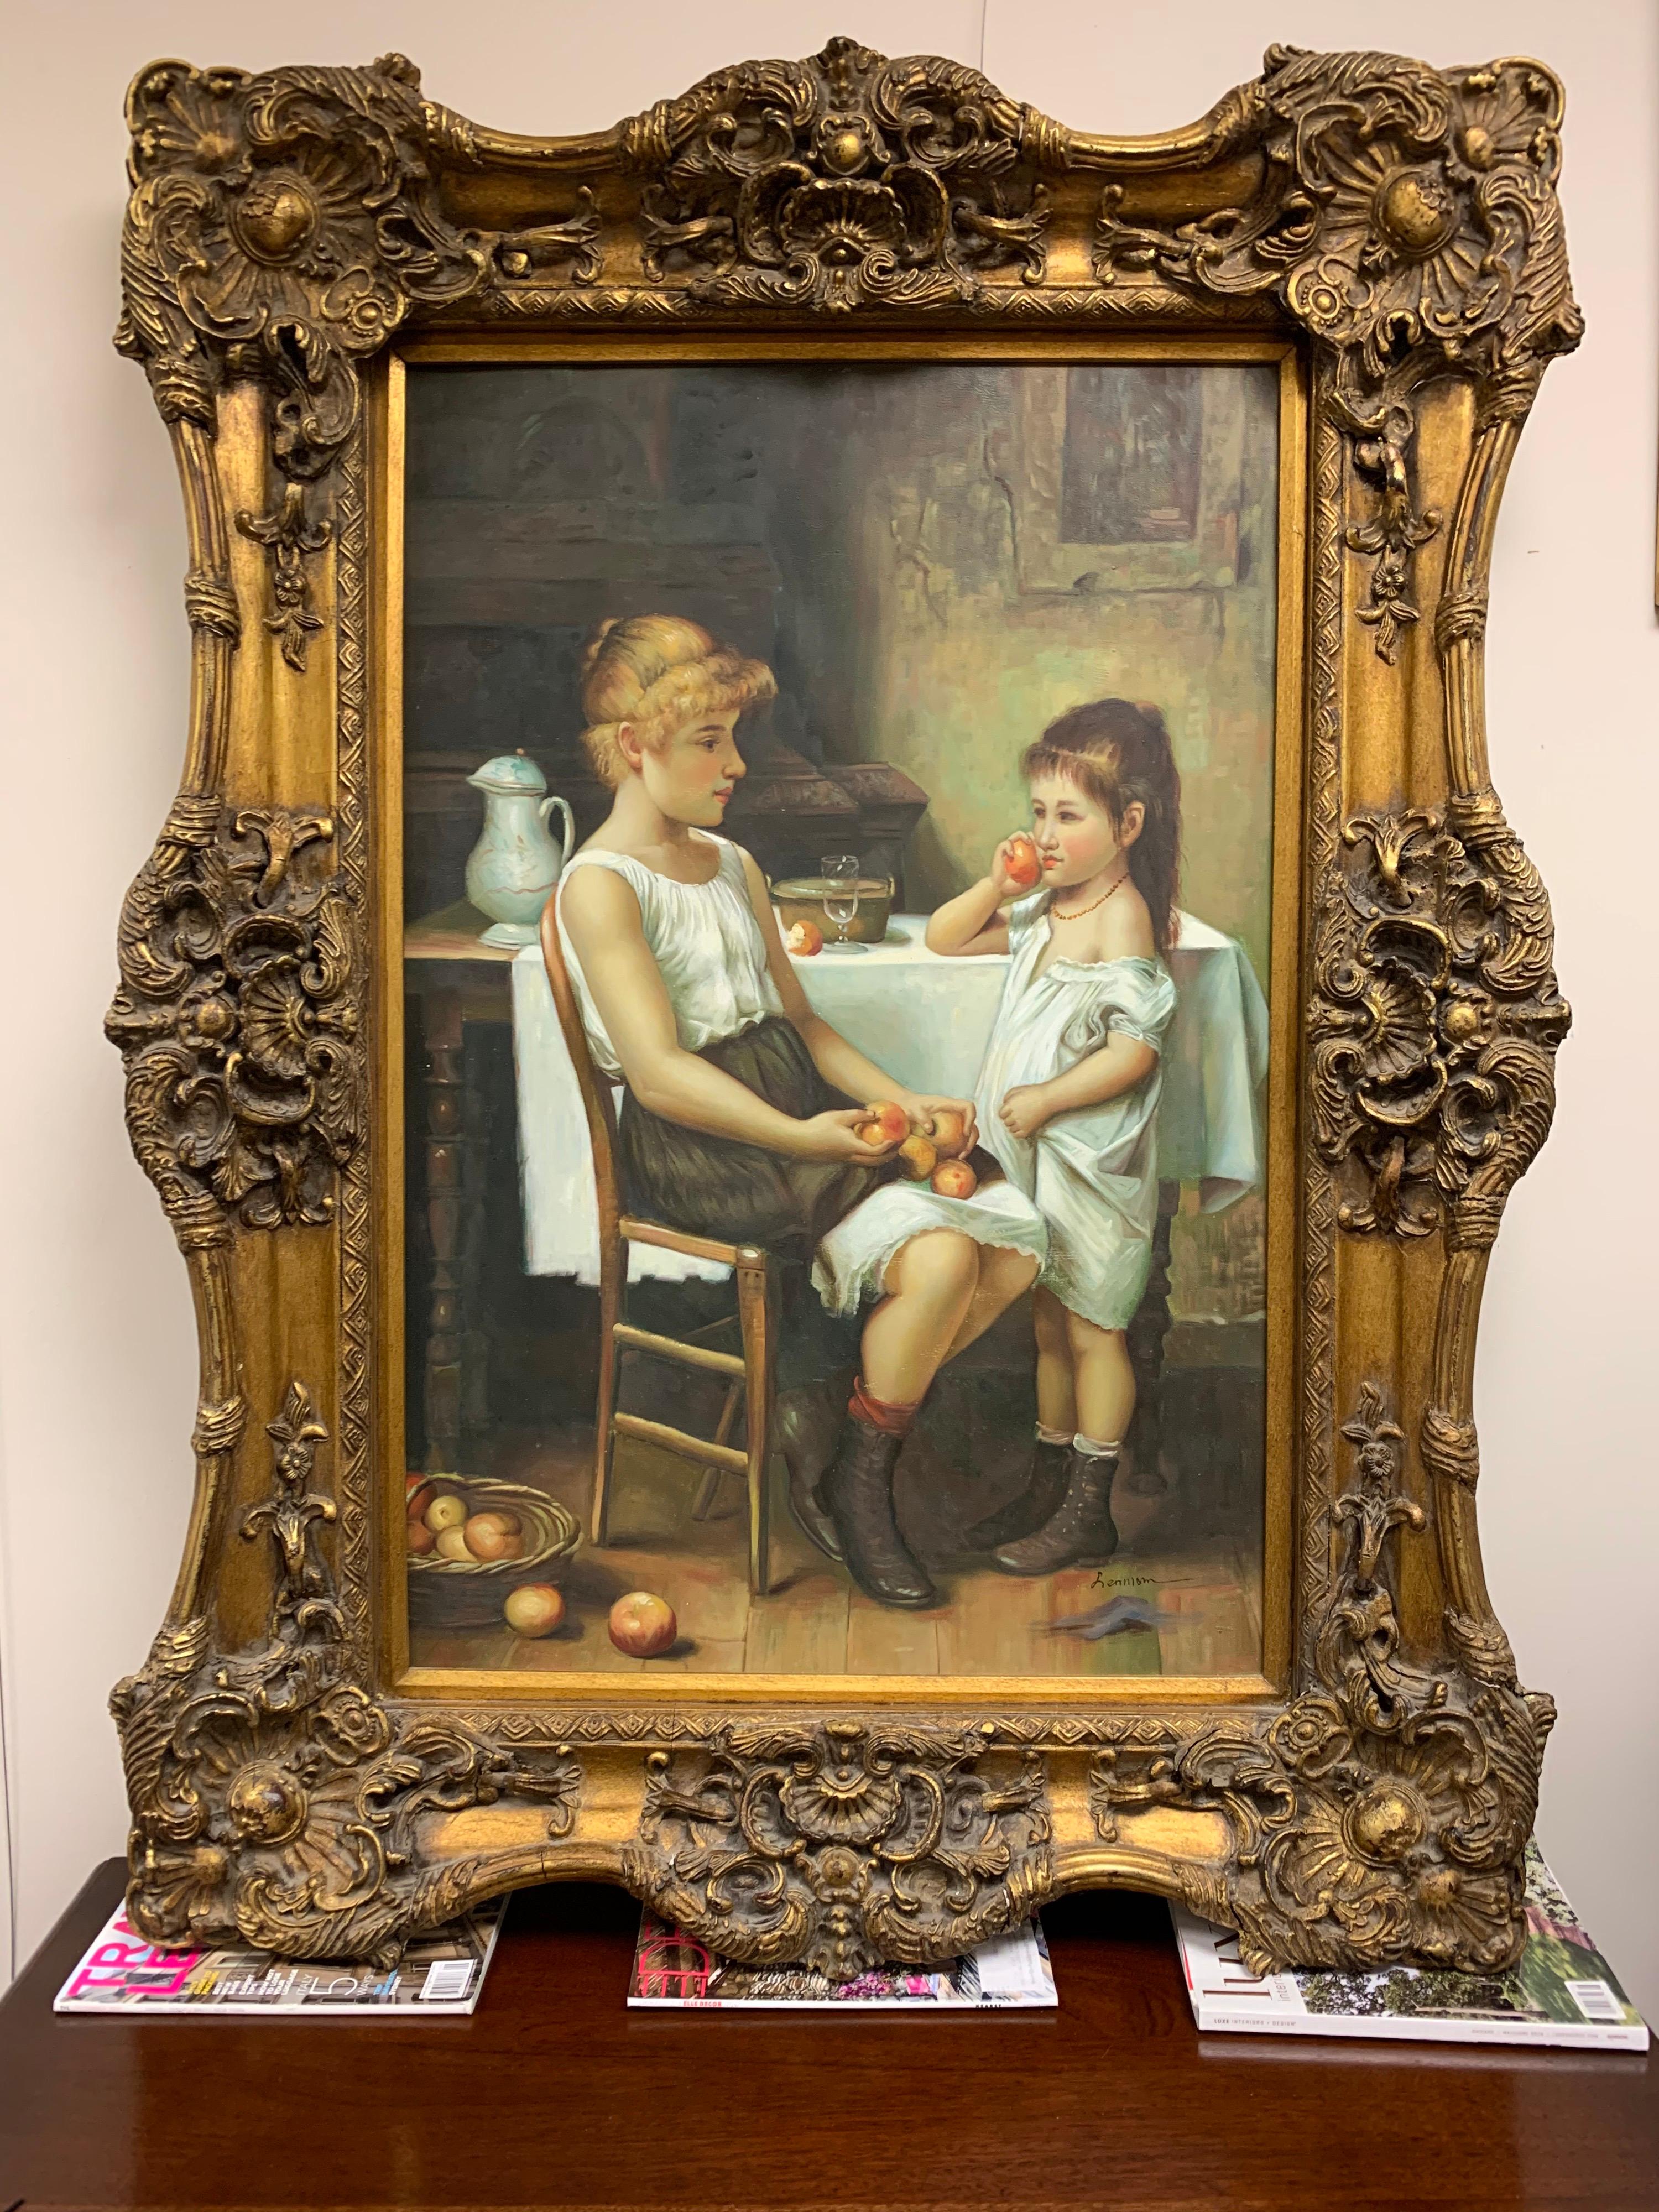 Original oil on canvas painting signed at bottom by the artist Lenmam. There is a lovely depiction of two sisters at home enjoying fresh picked apples. The frame is original and is intricately carved giltwood.